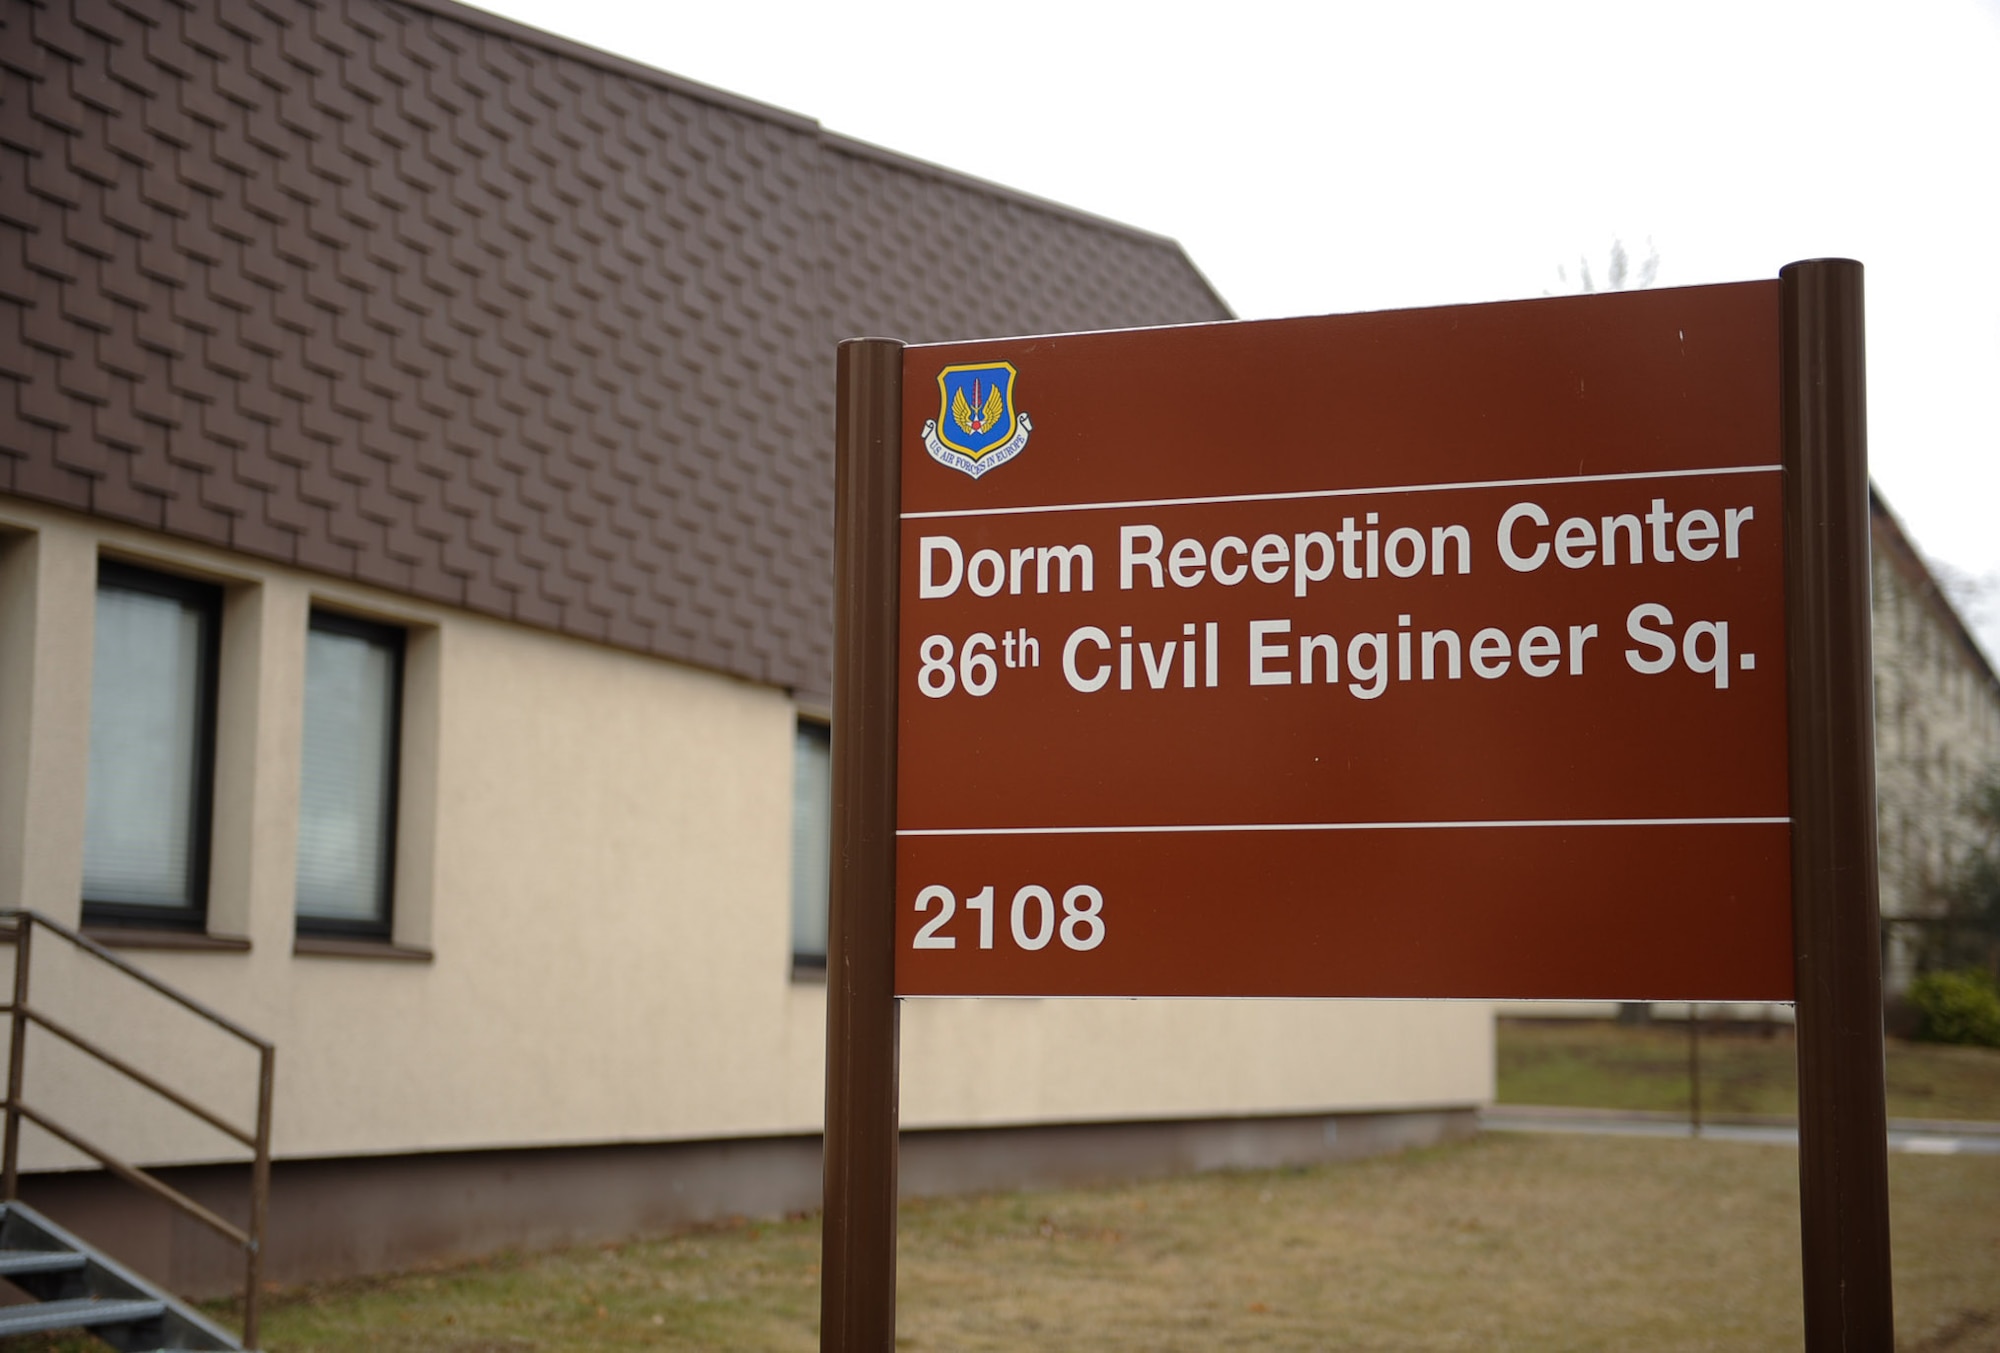 The Dorm Reception Center sign is displayed on Ramstein Air Base, Germany, Feb. 7, 2017. Ramstein’s Dorm Reception Center and the Vogelweh Housing Office are dedicated to ensuring that Airmen who are moving from the dorms experience a smooth transition. (U.S. Air Force photo by Airman 1st Class Savannah L. Waters)